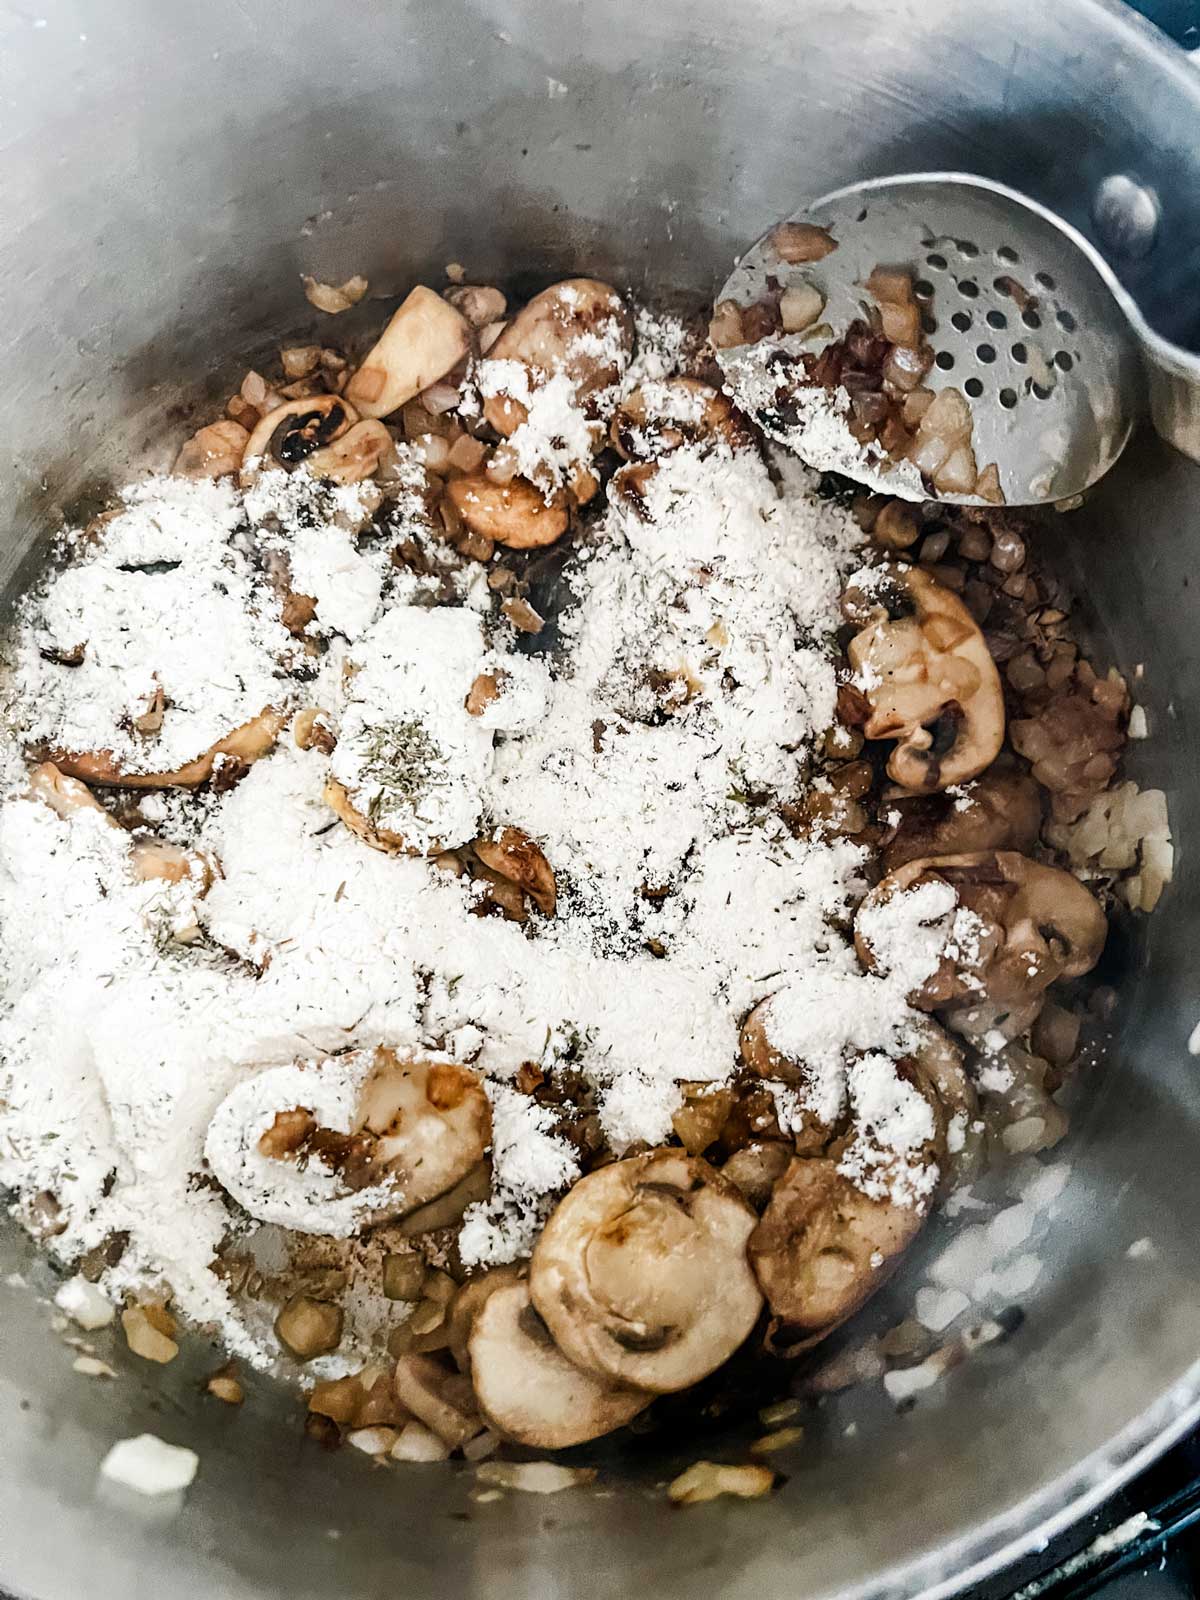 Sautéed mushrooms and onions that have been sprinkled with flour.